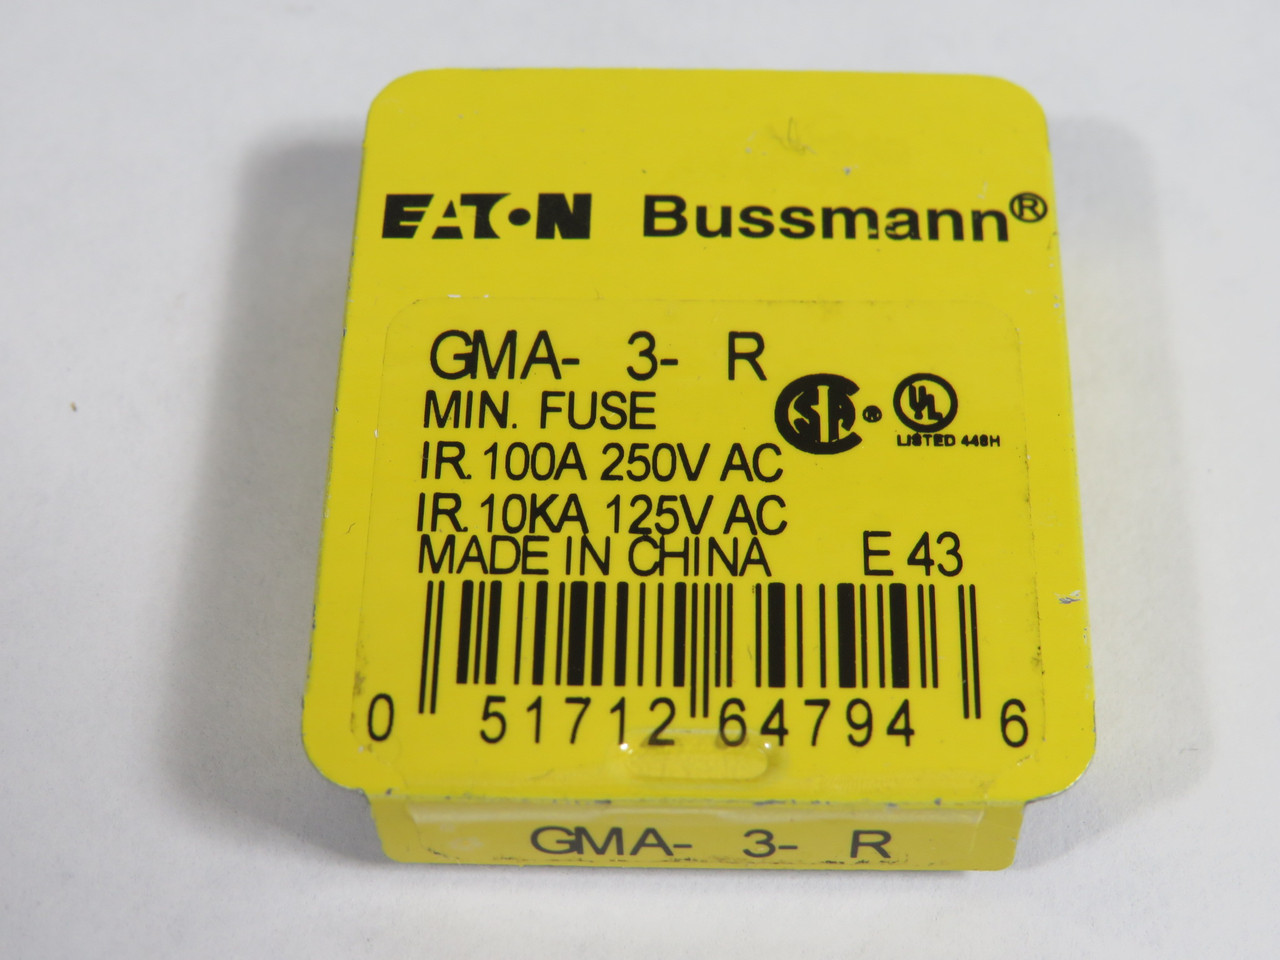 Eaton Bussmann GMA-3-R Fast-Acting Glass Fuse 3A 250V 5-Pack NEW